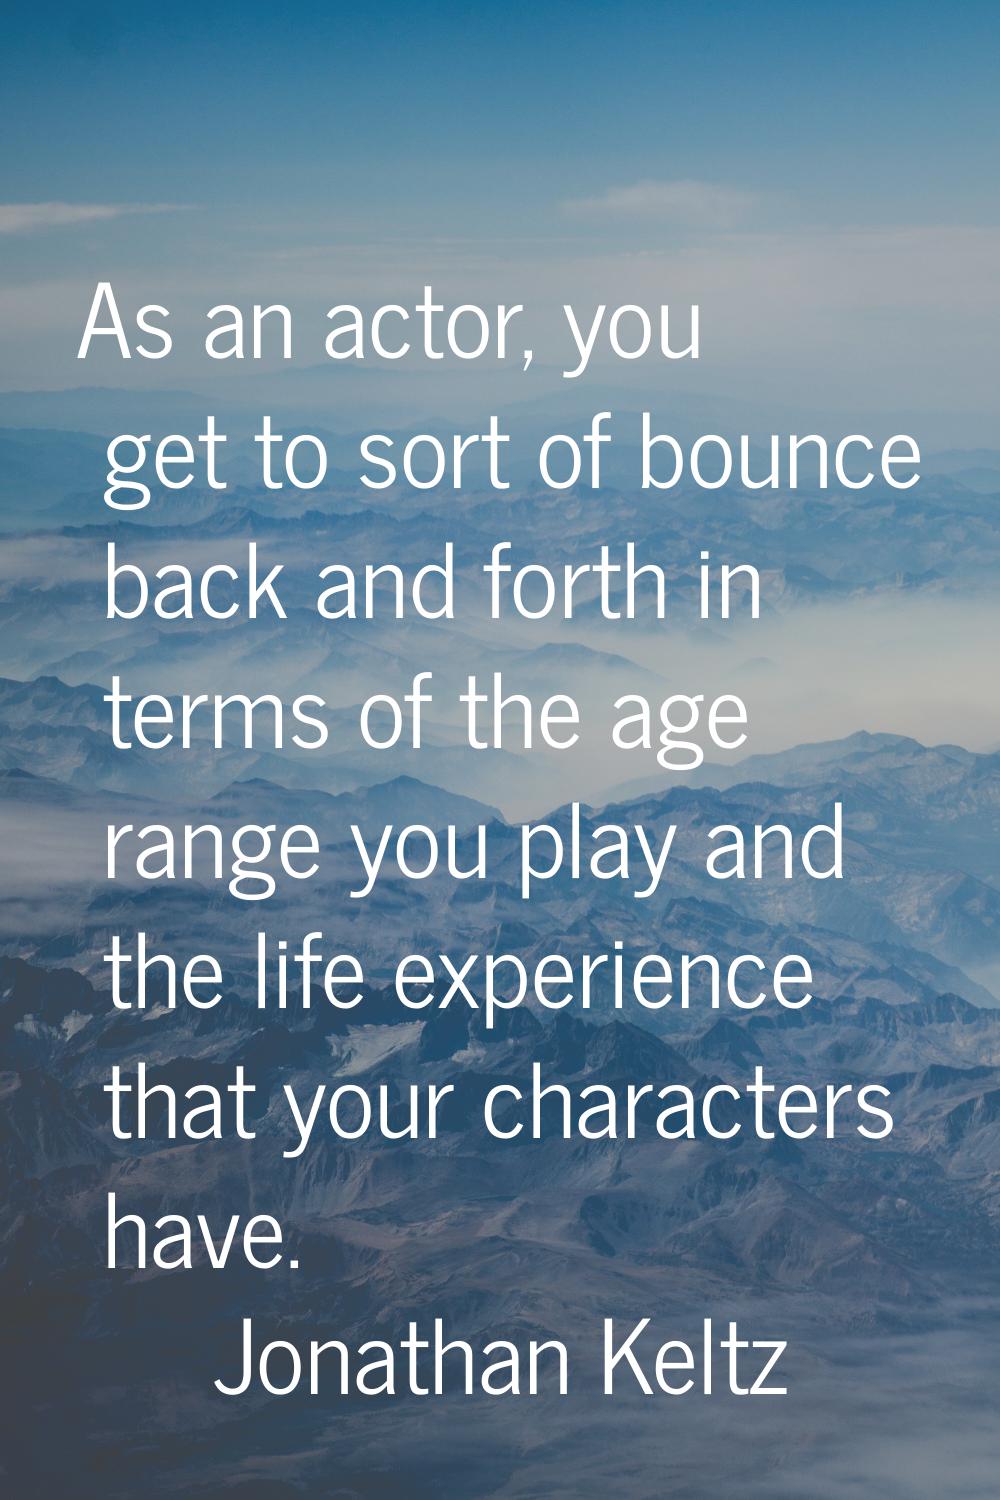 As an actor, you get to sort of bounce back and forth in terms of the age range you play and the li